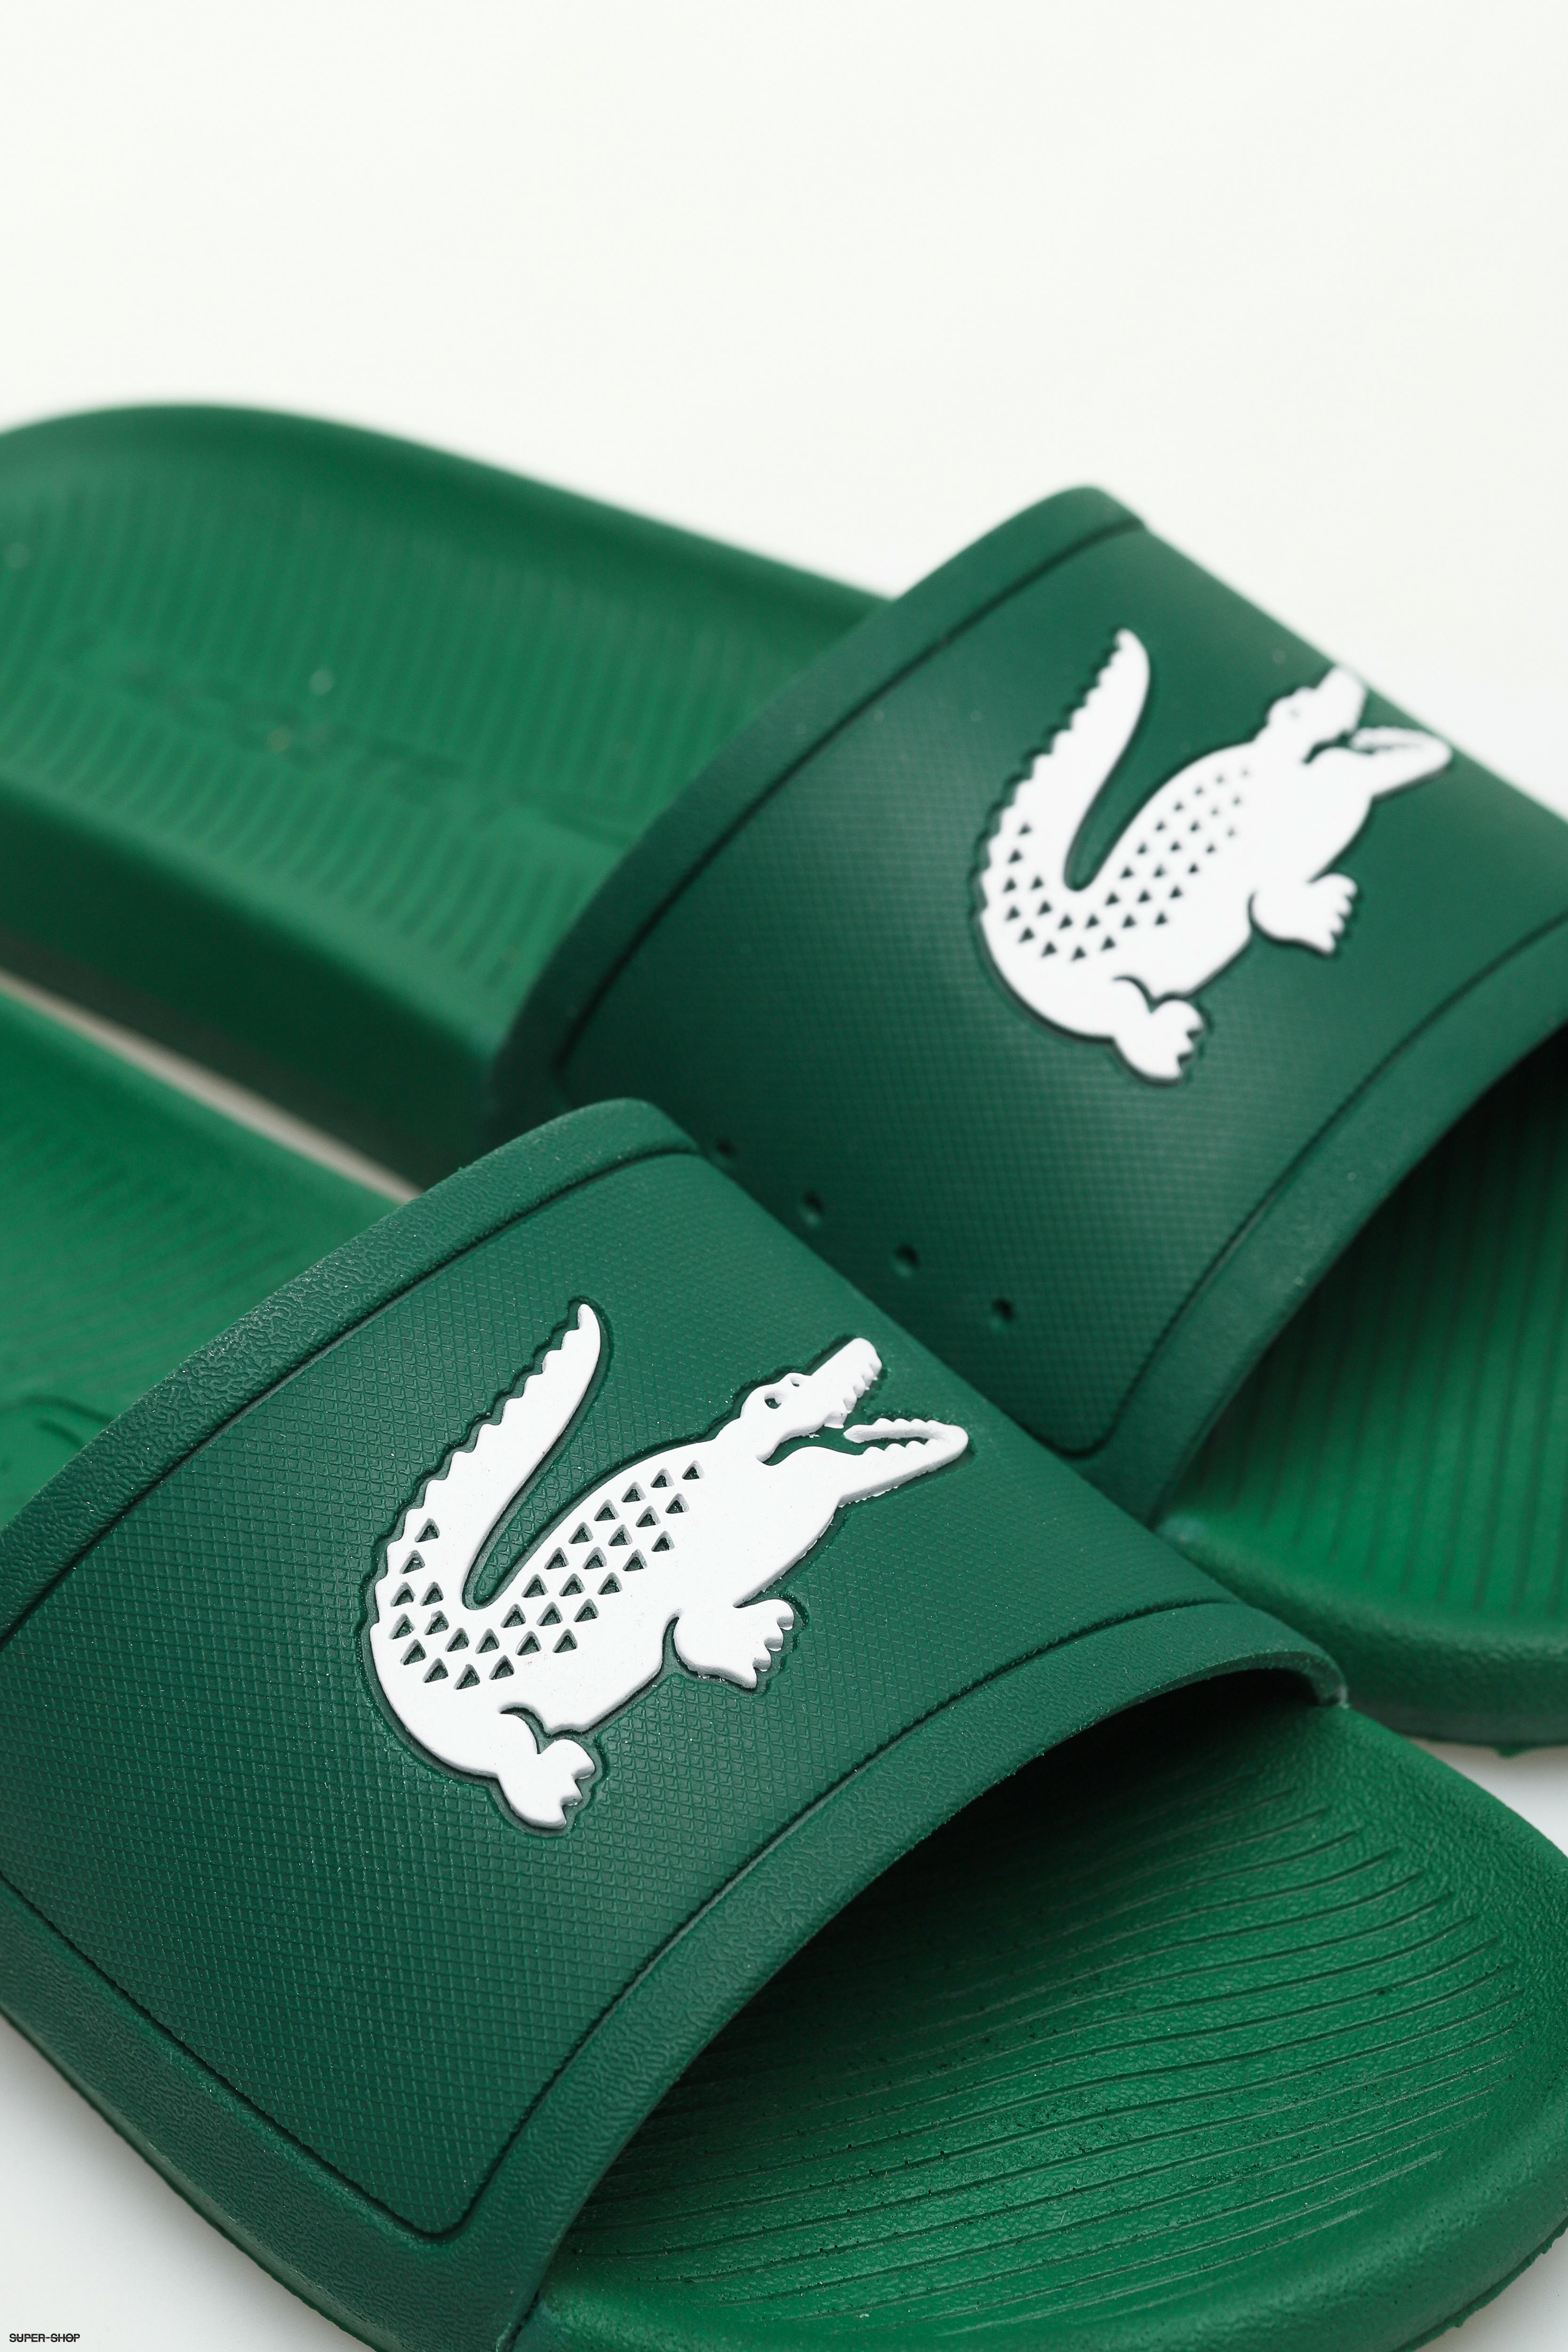 Green Slides Summer Beach Pool Shoes Lacoste Croco 119 1 Mens White